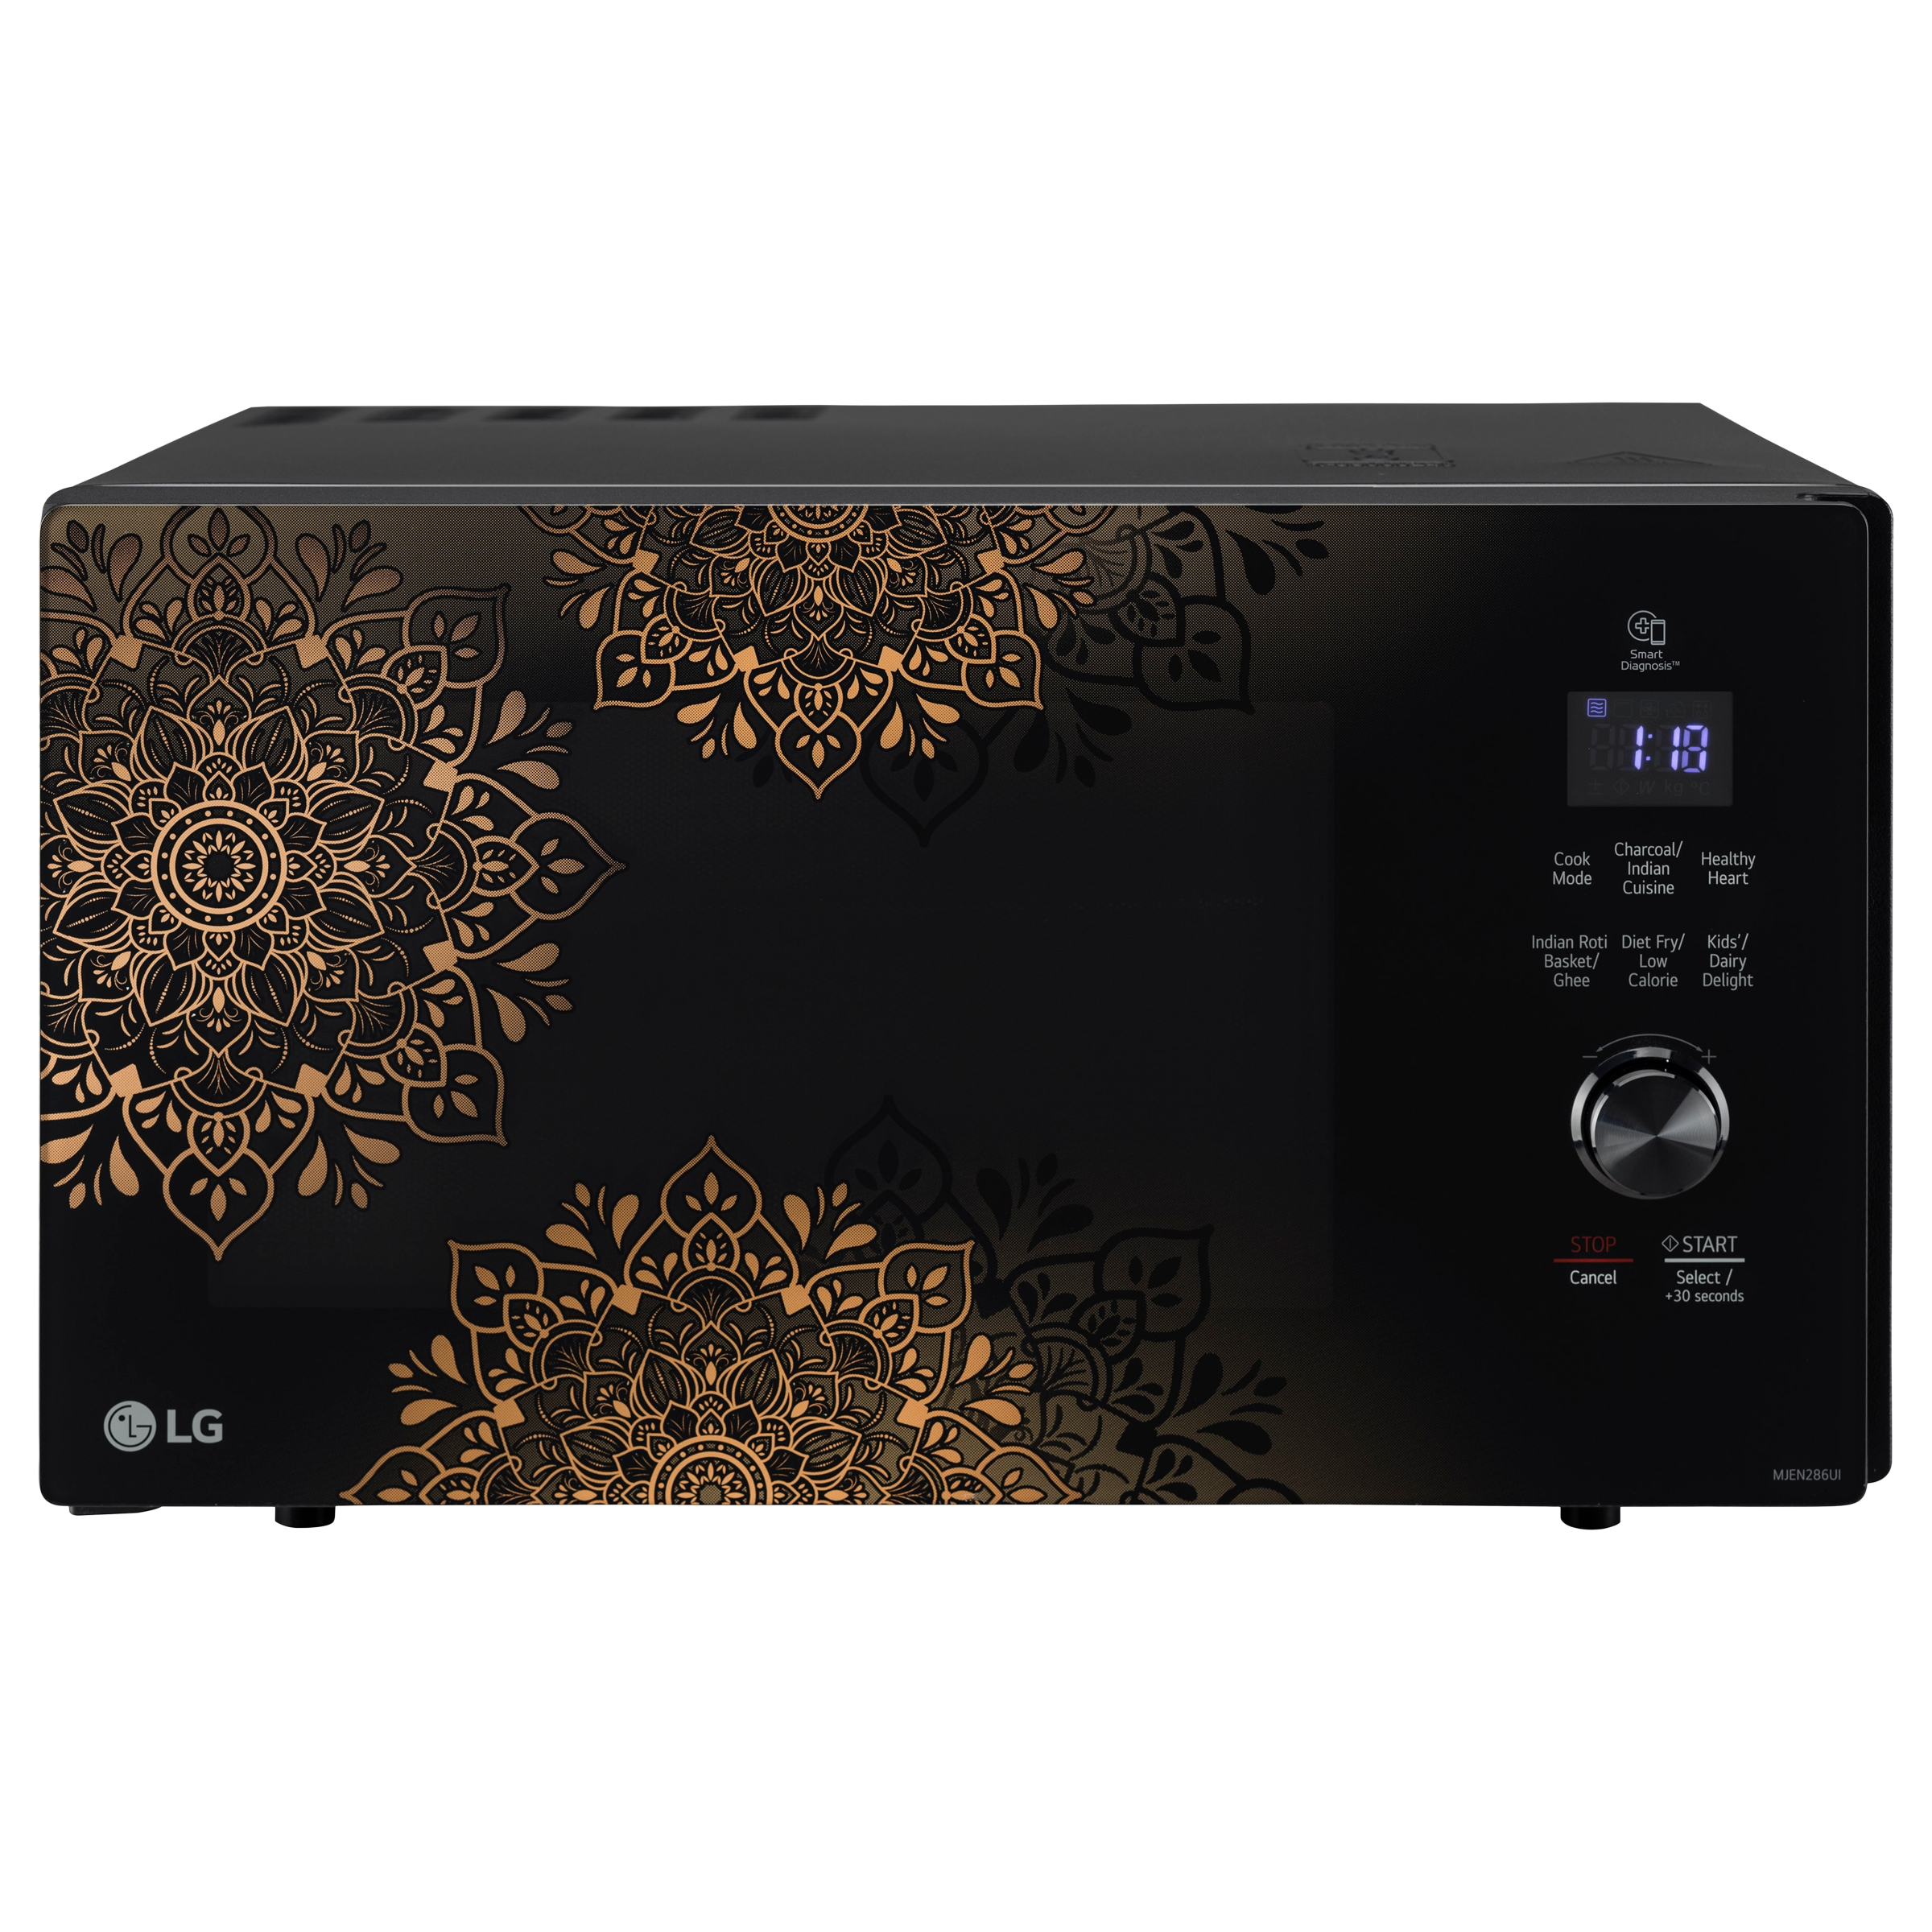 LG All In One 28 Litres Convection Microwave Oven (Charcoal Lighting Heater, MJEN286UI, Black)_1